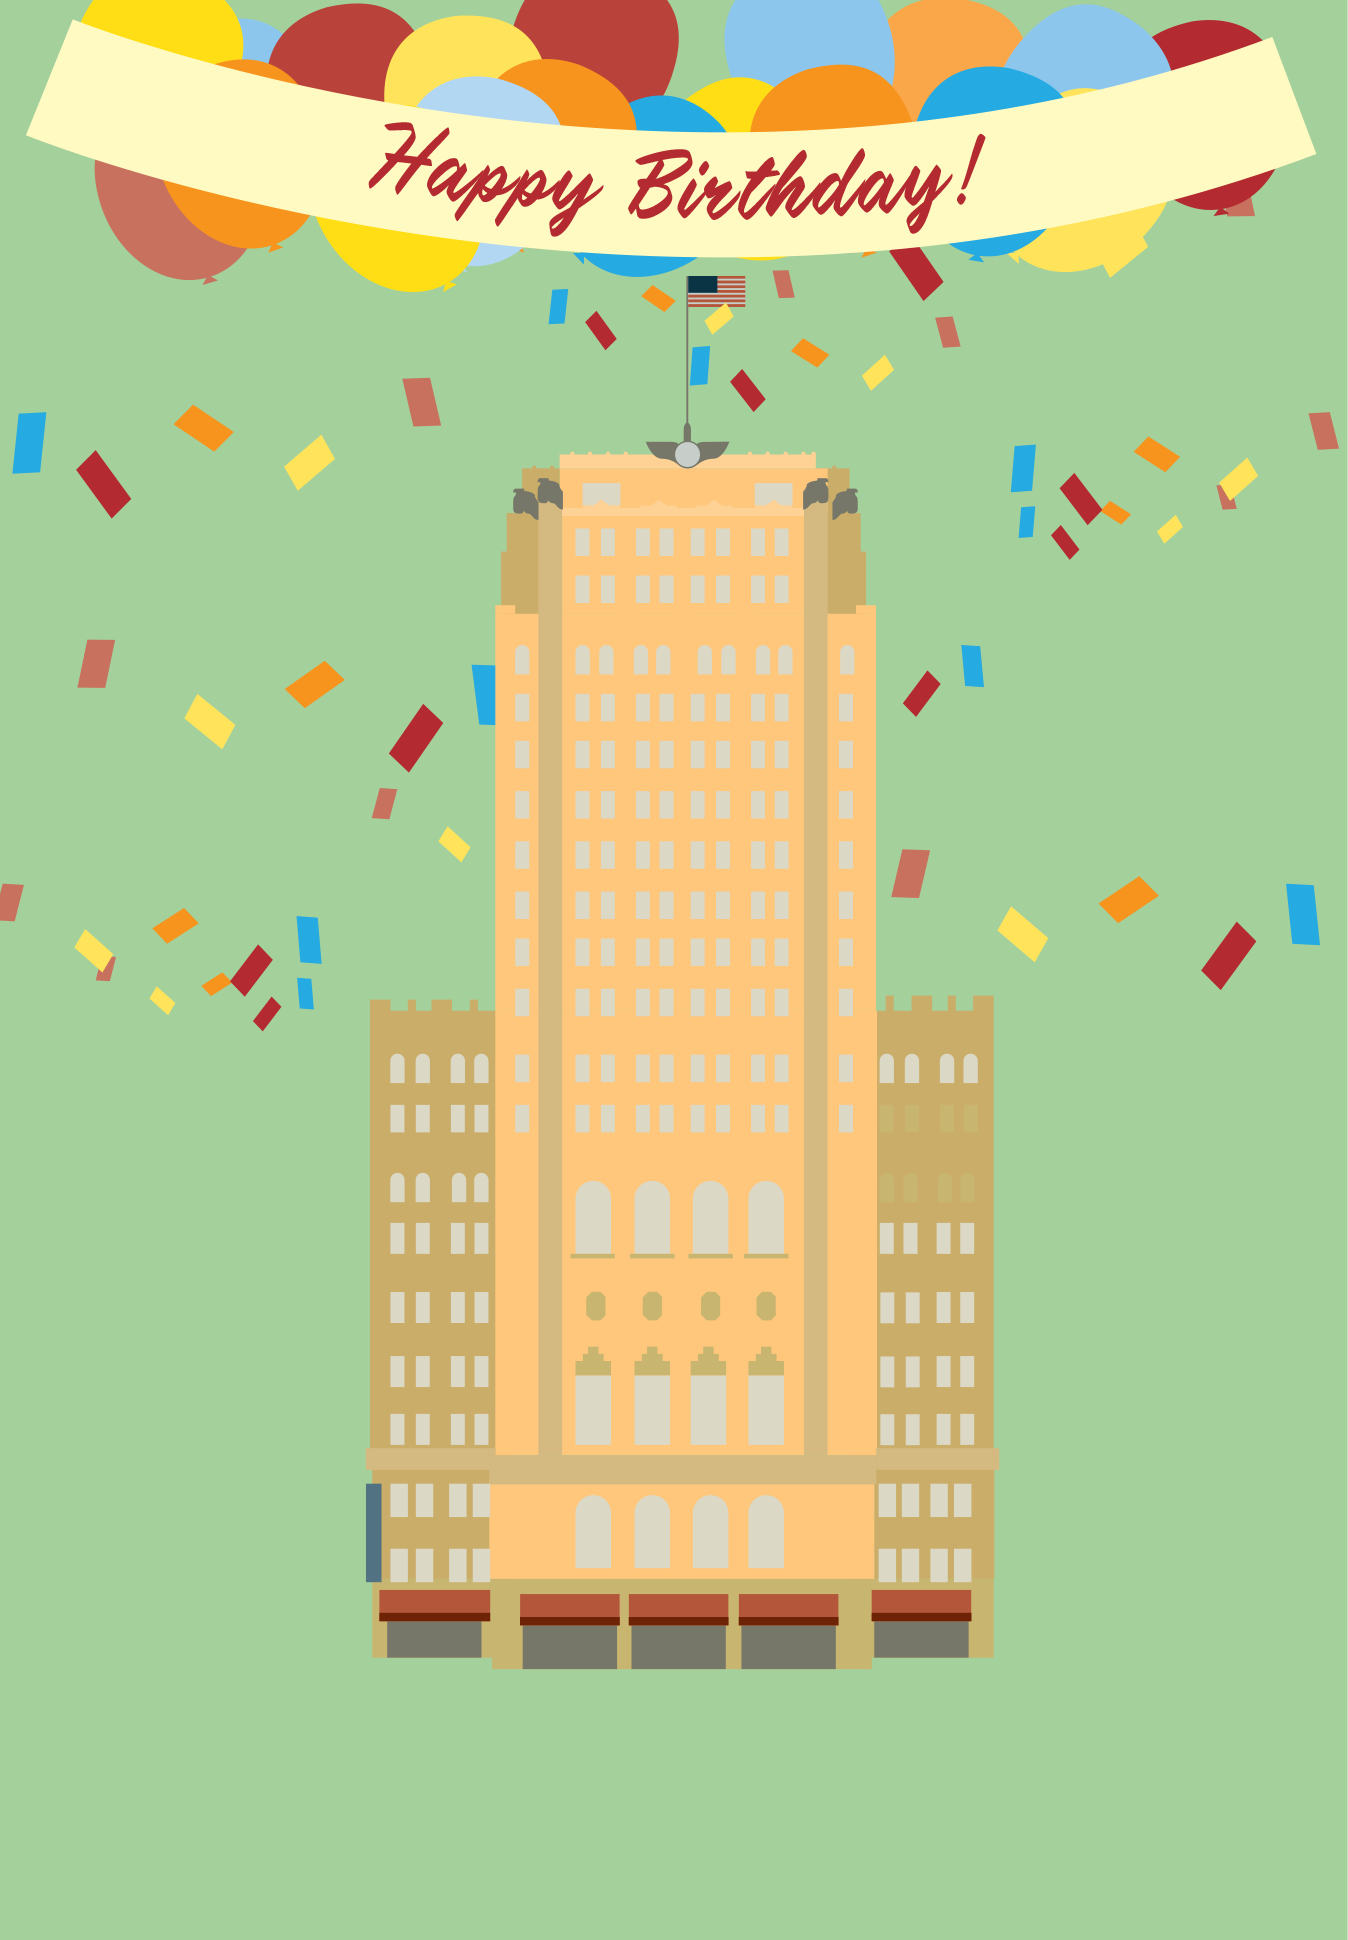  I created an illustration of the building to use on a birthday card that employees would receive.  